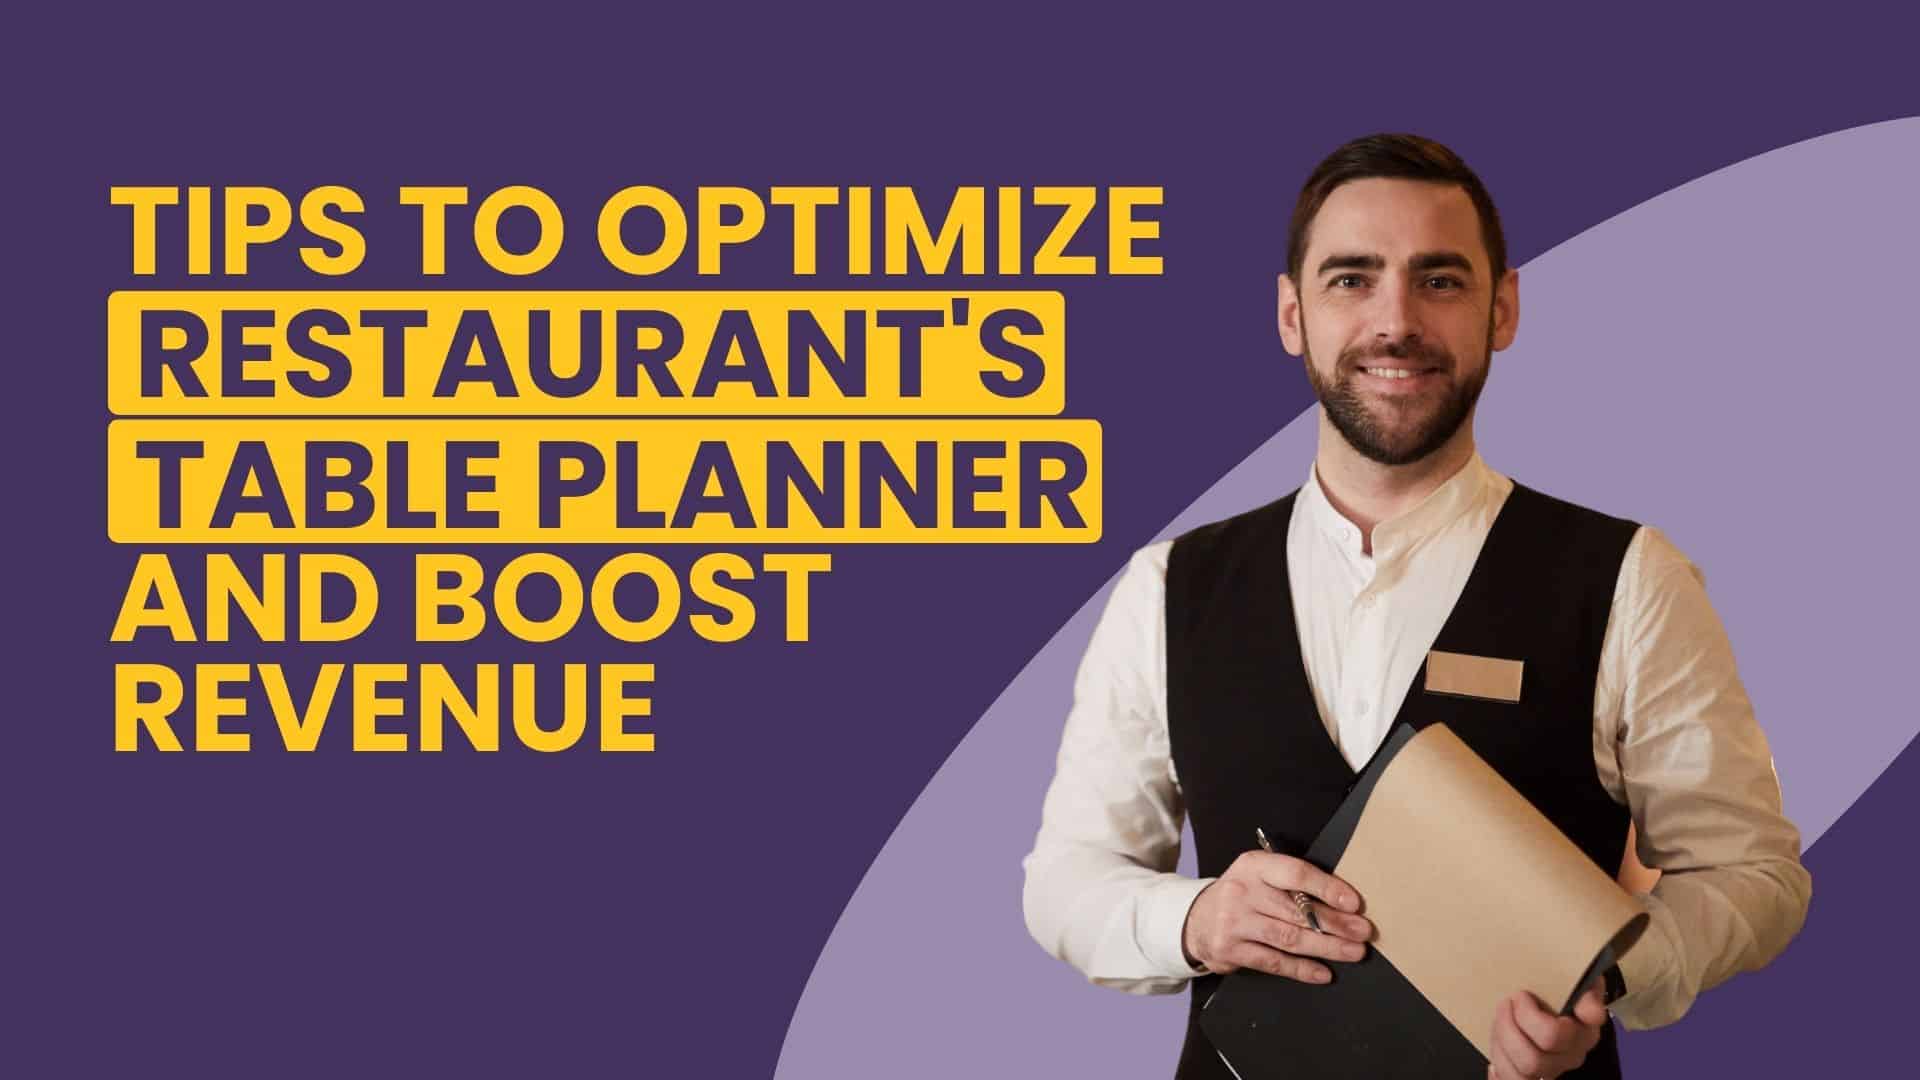 10 Tips to optimize your restaurant’s table planner and boost revenue